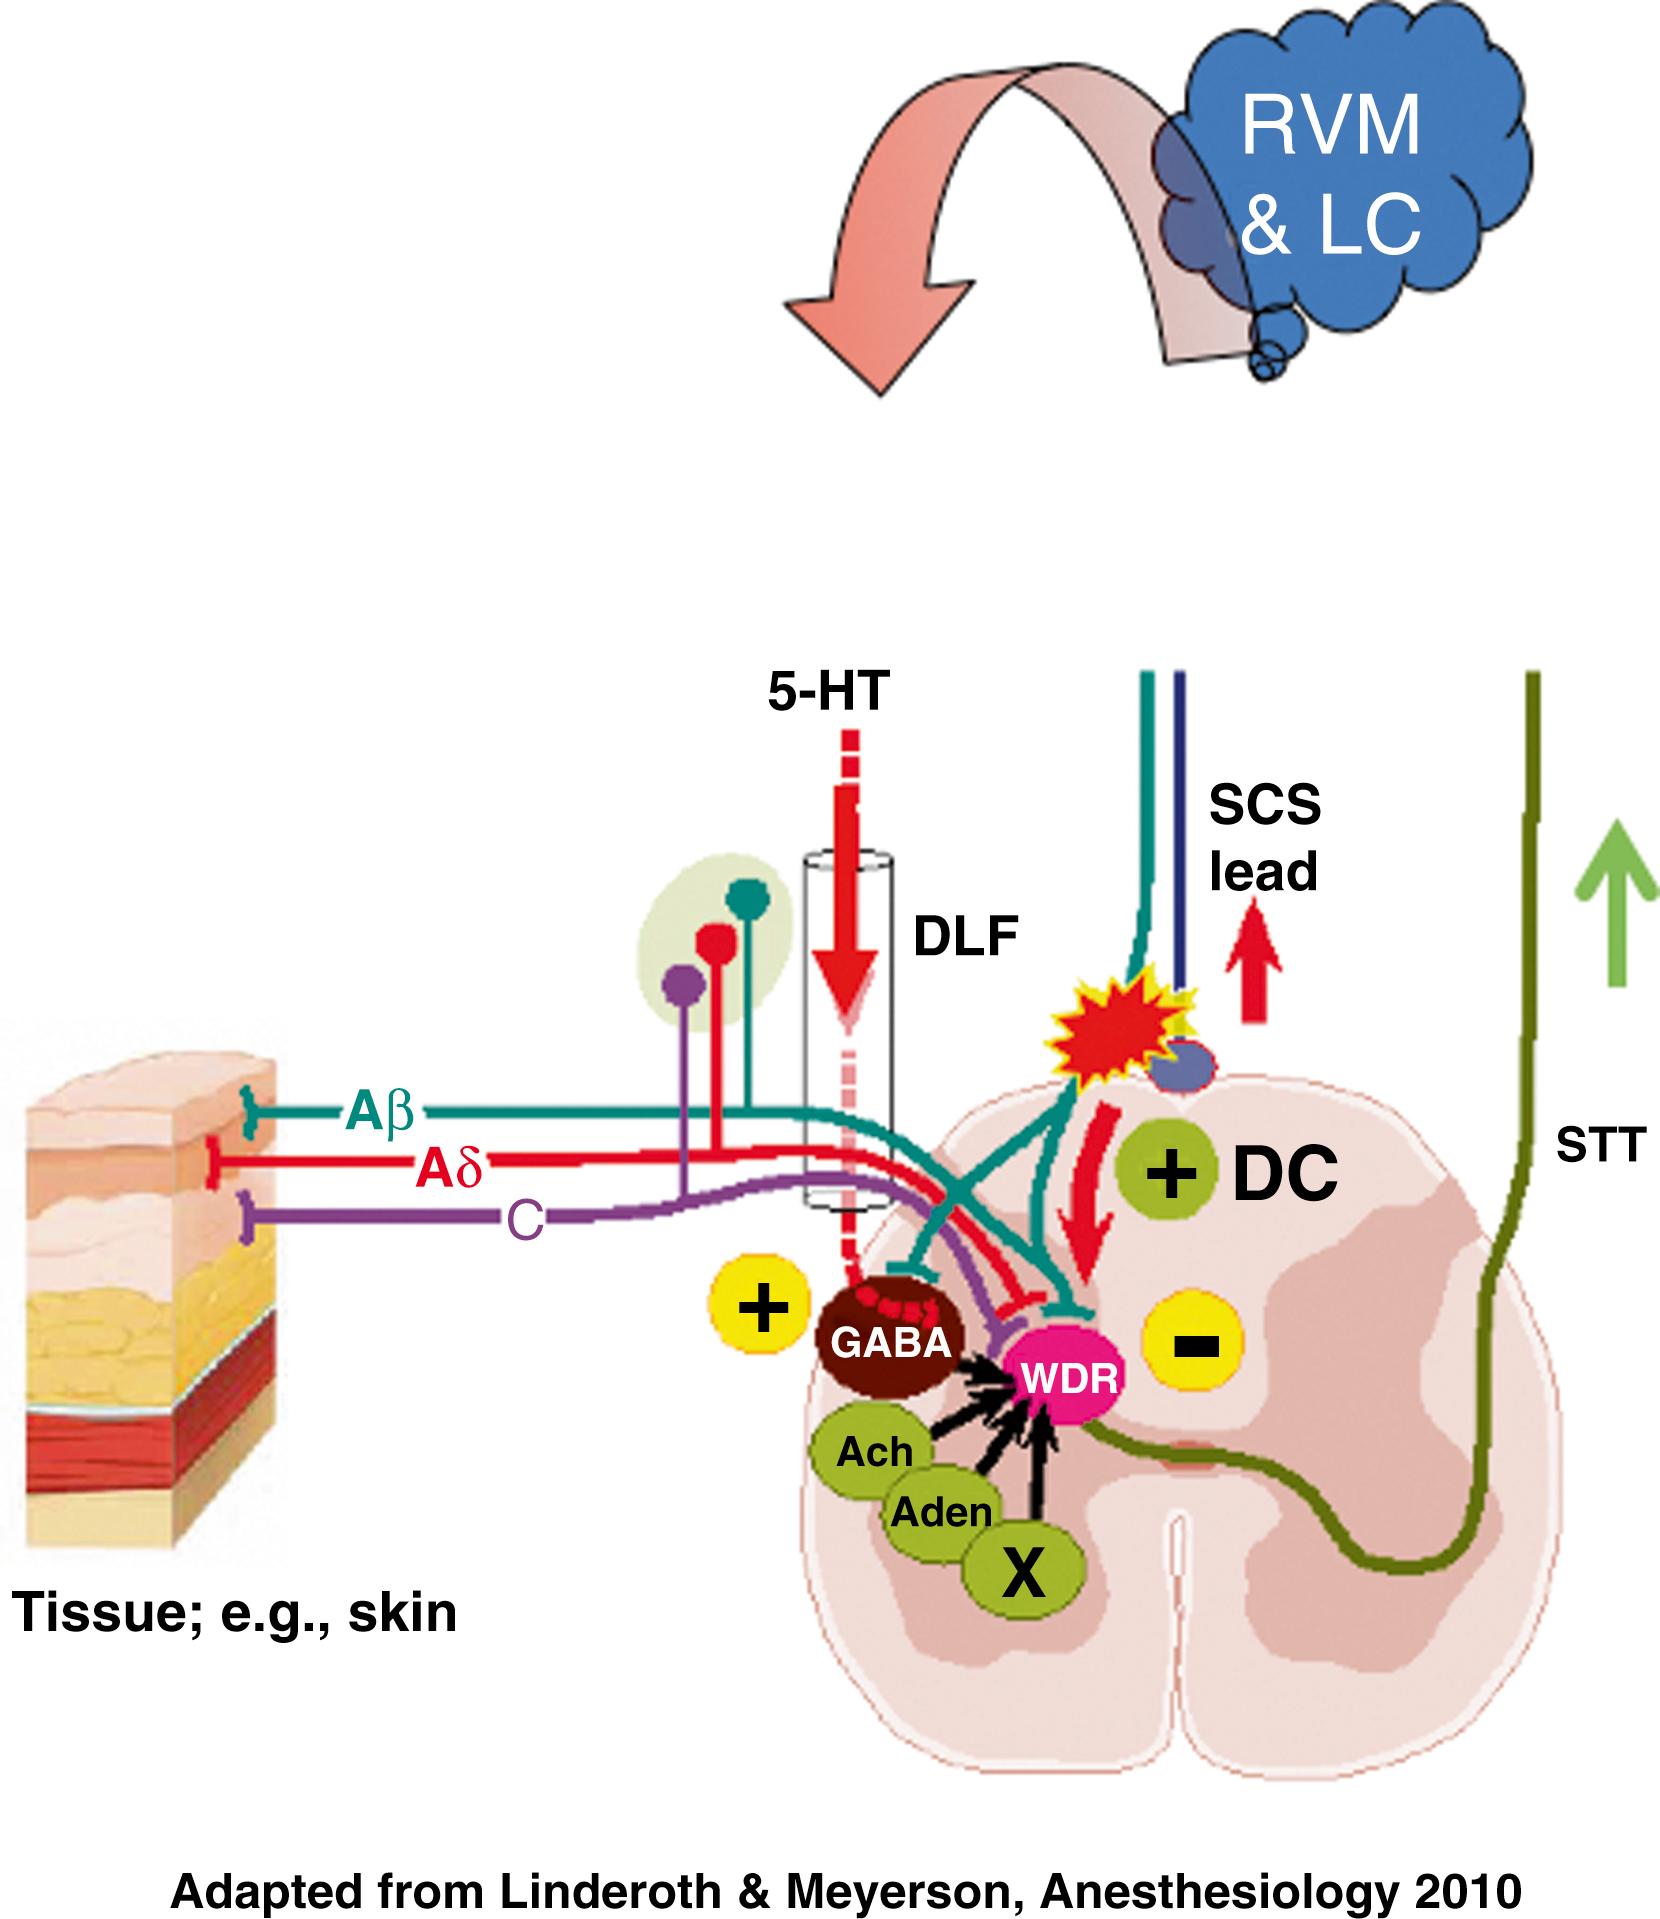 FIGURE 119.3, The present knowledge of the neural circuitry and transmitters involved in conventional spinal cord stimulation (SCS) , when applied for neuropathic pain.